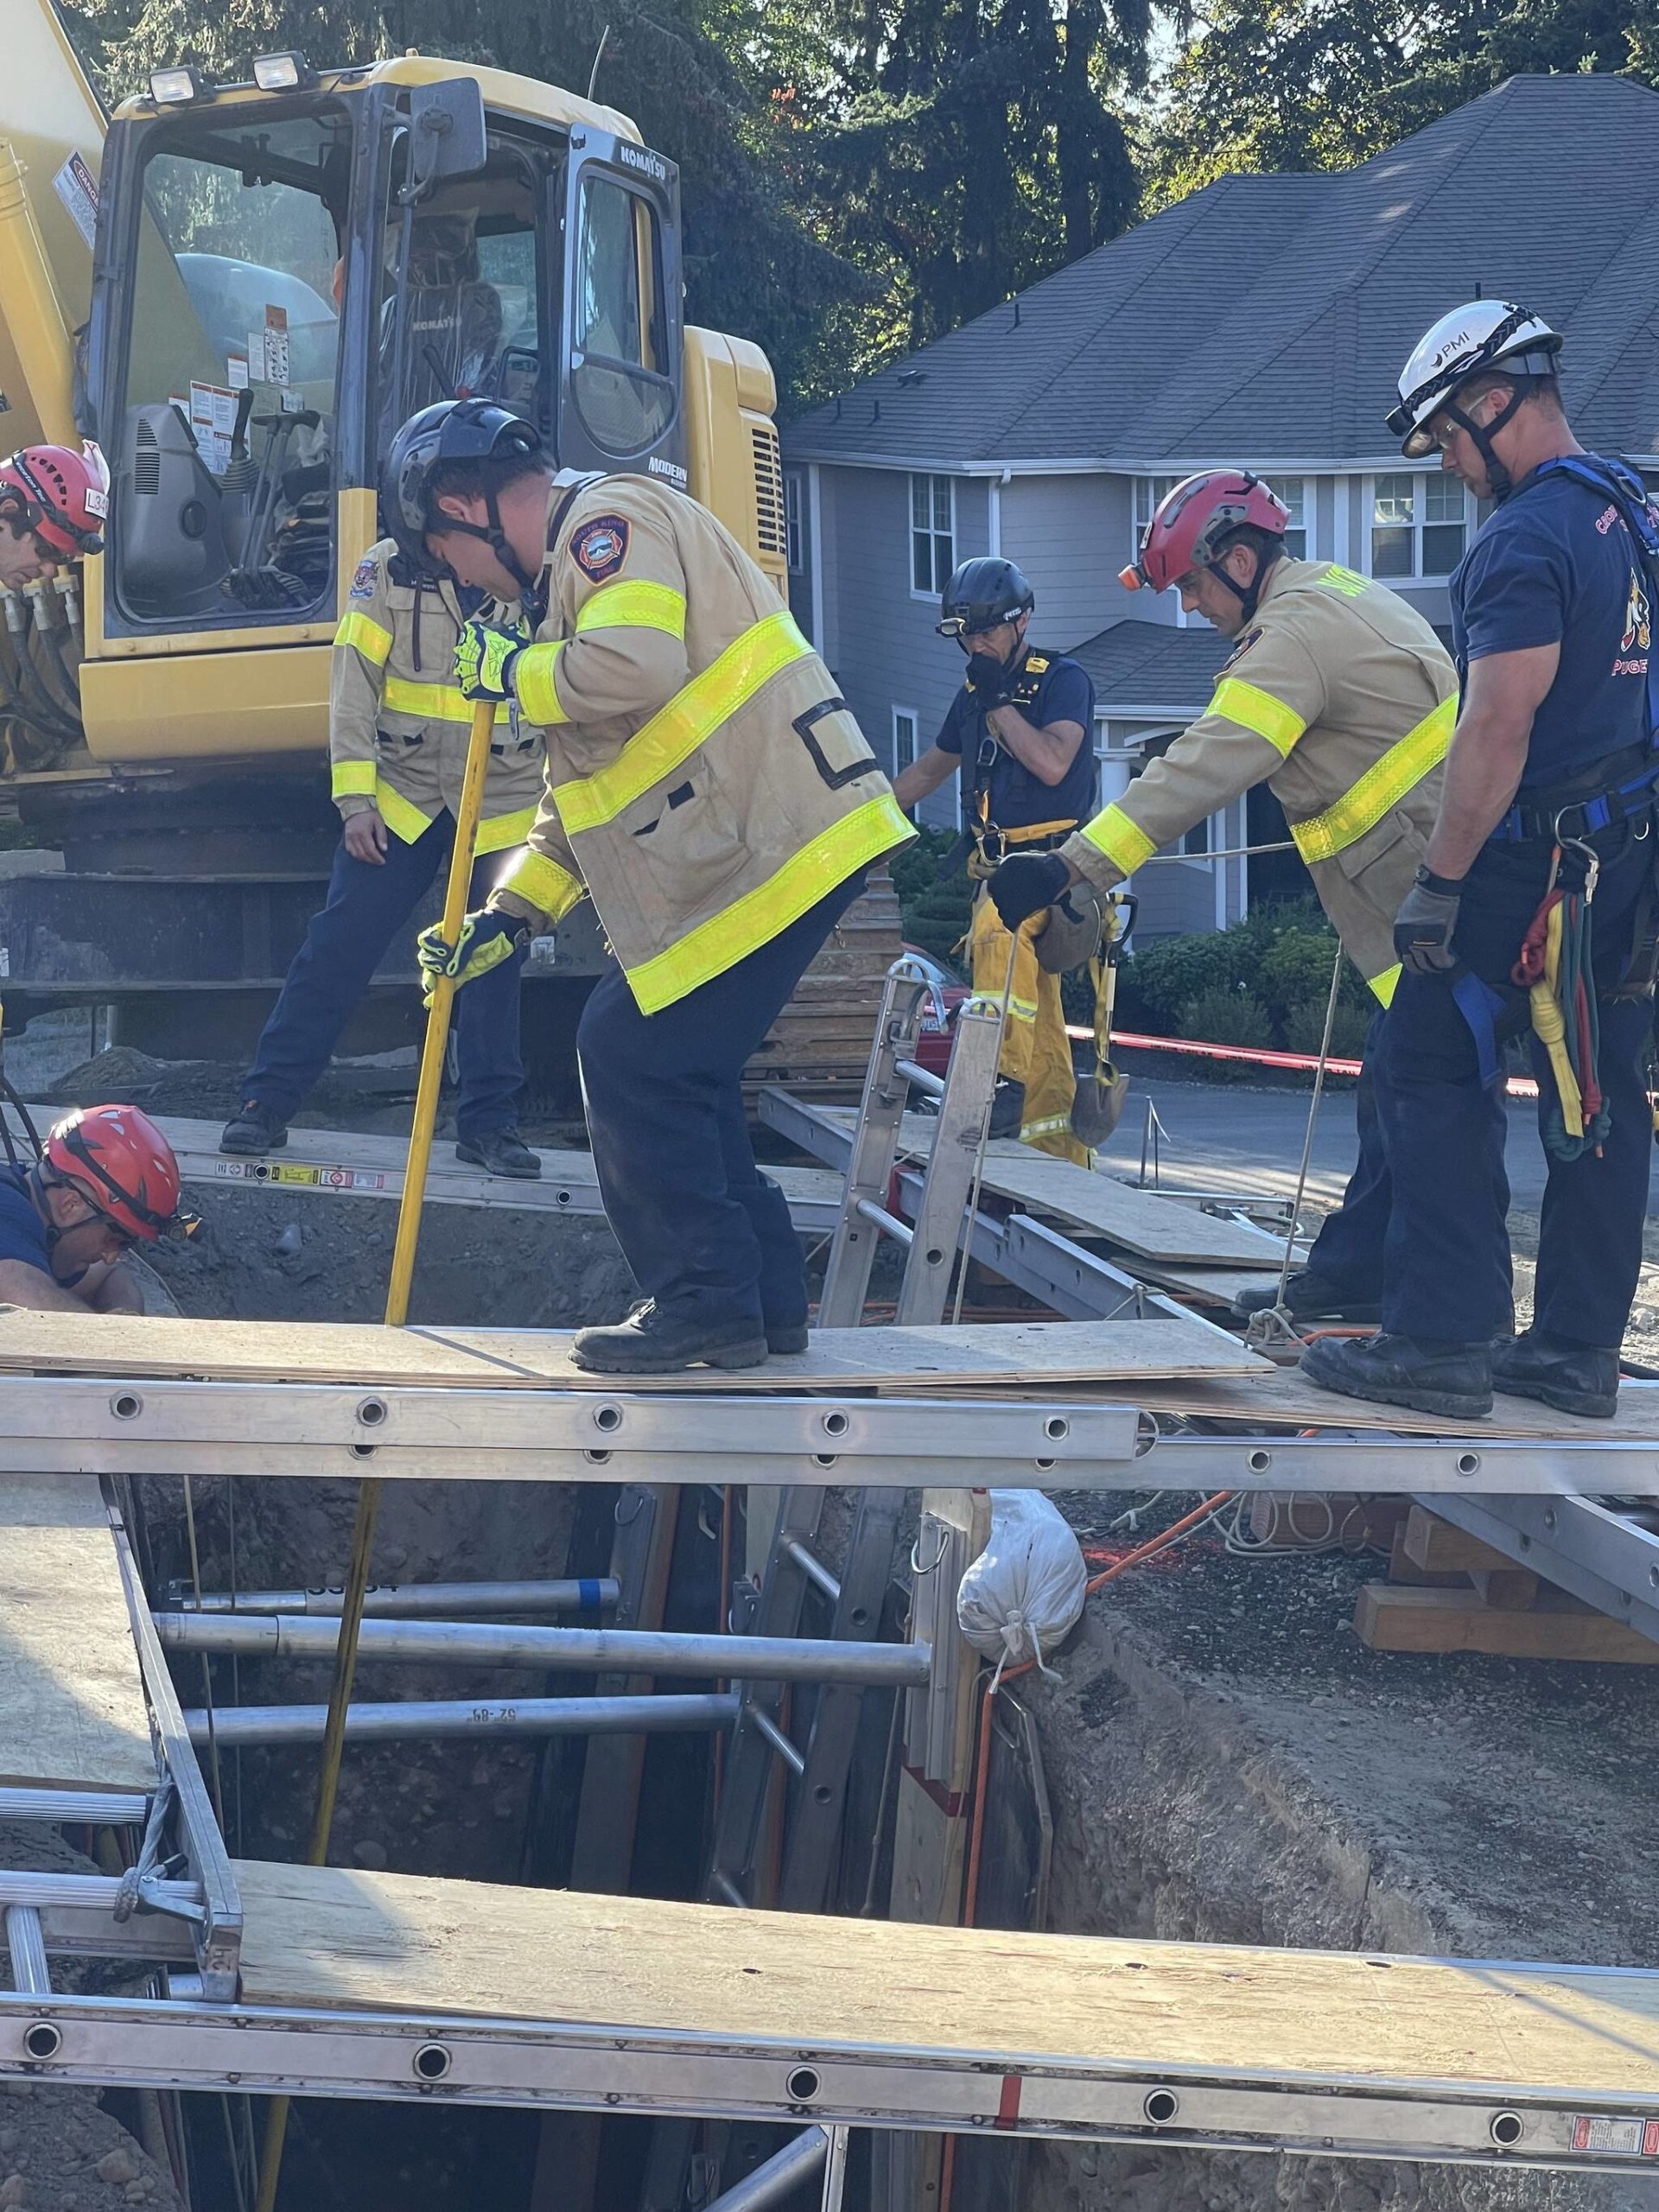 What started out as a rescue operation became a recovery operation when a responder found that Surjit Gill had no pulse. Between 50 and 60 responders worked for hours to make sure the trench was stable enough for recovery. Photo courtesy of Renton Regional Fire Authority.